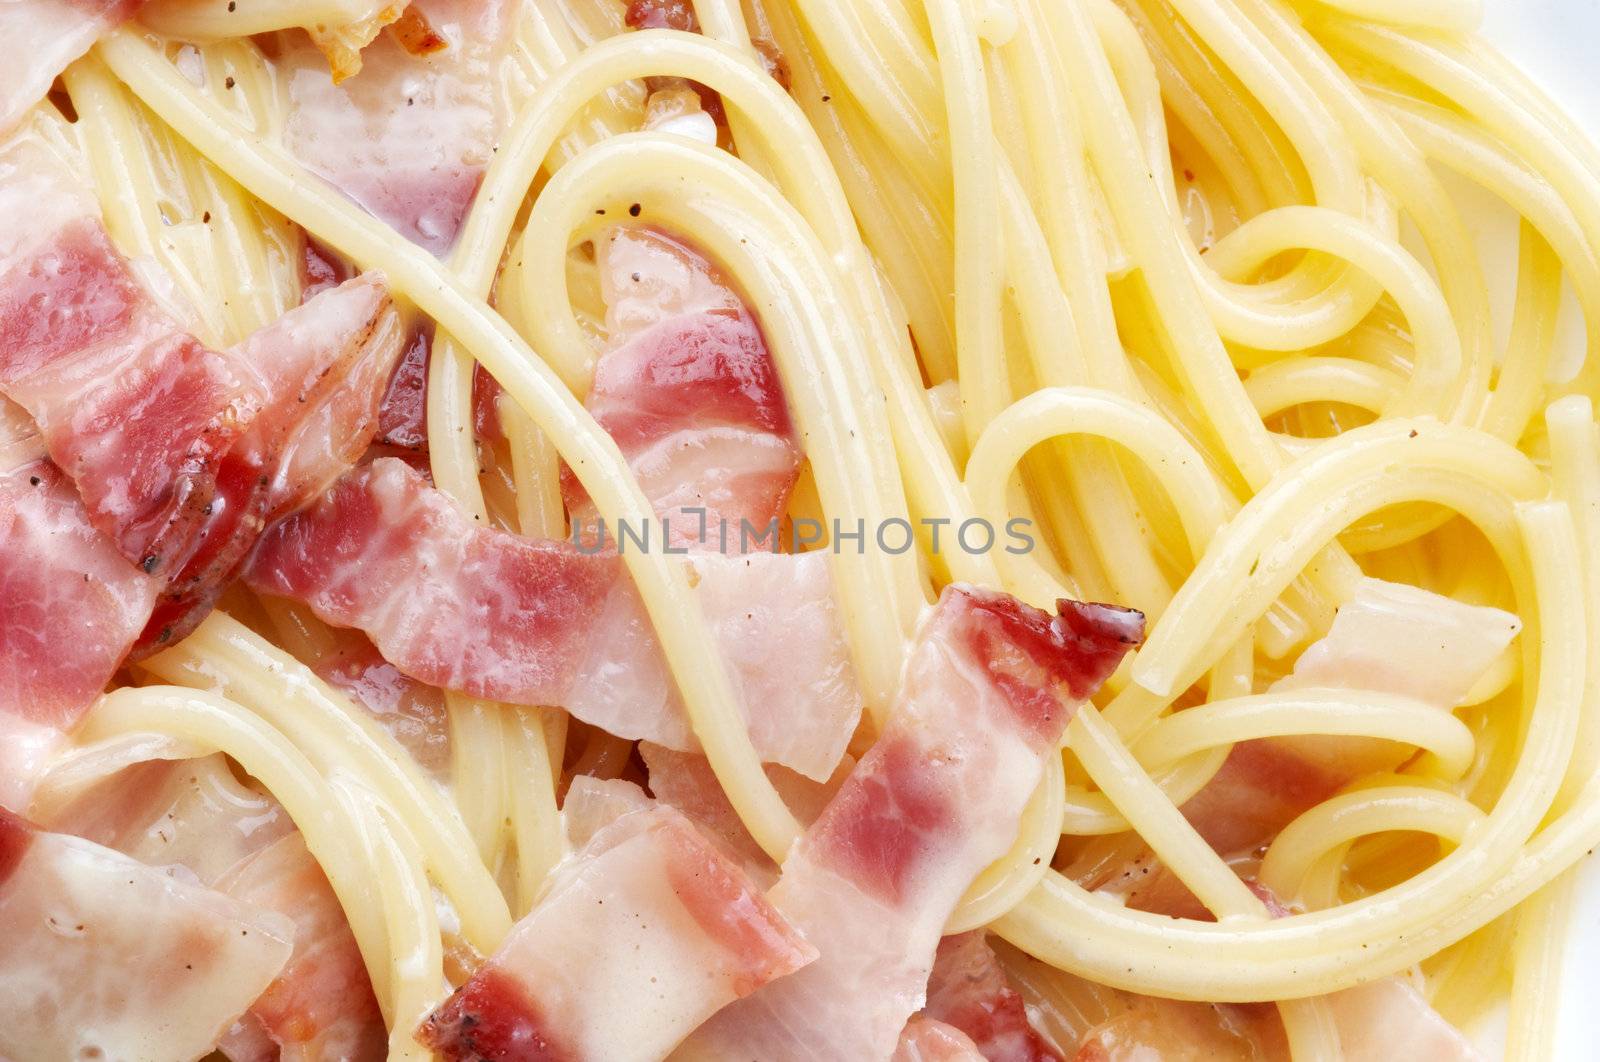 pasta carbonara, with bacon by starush